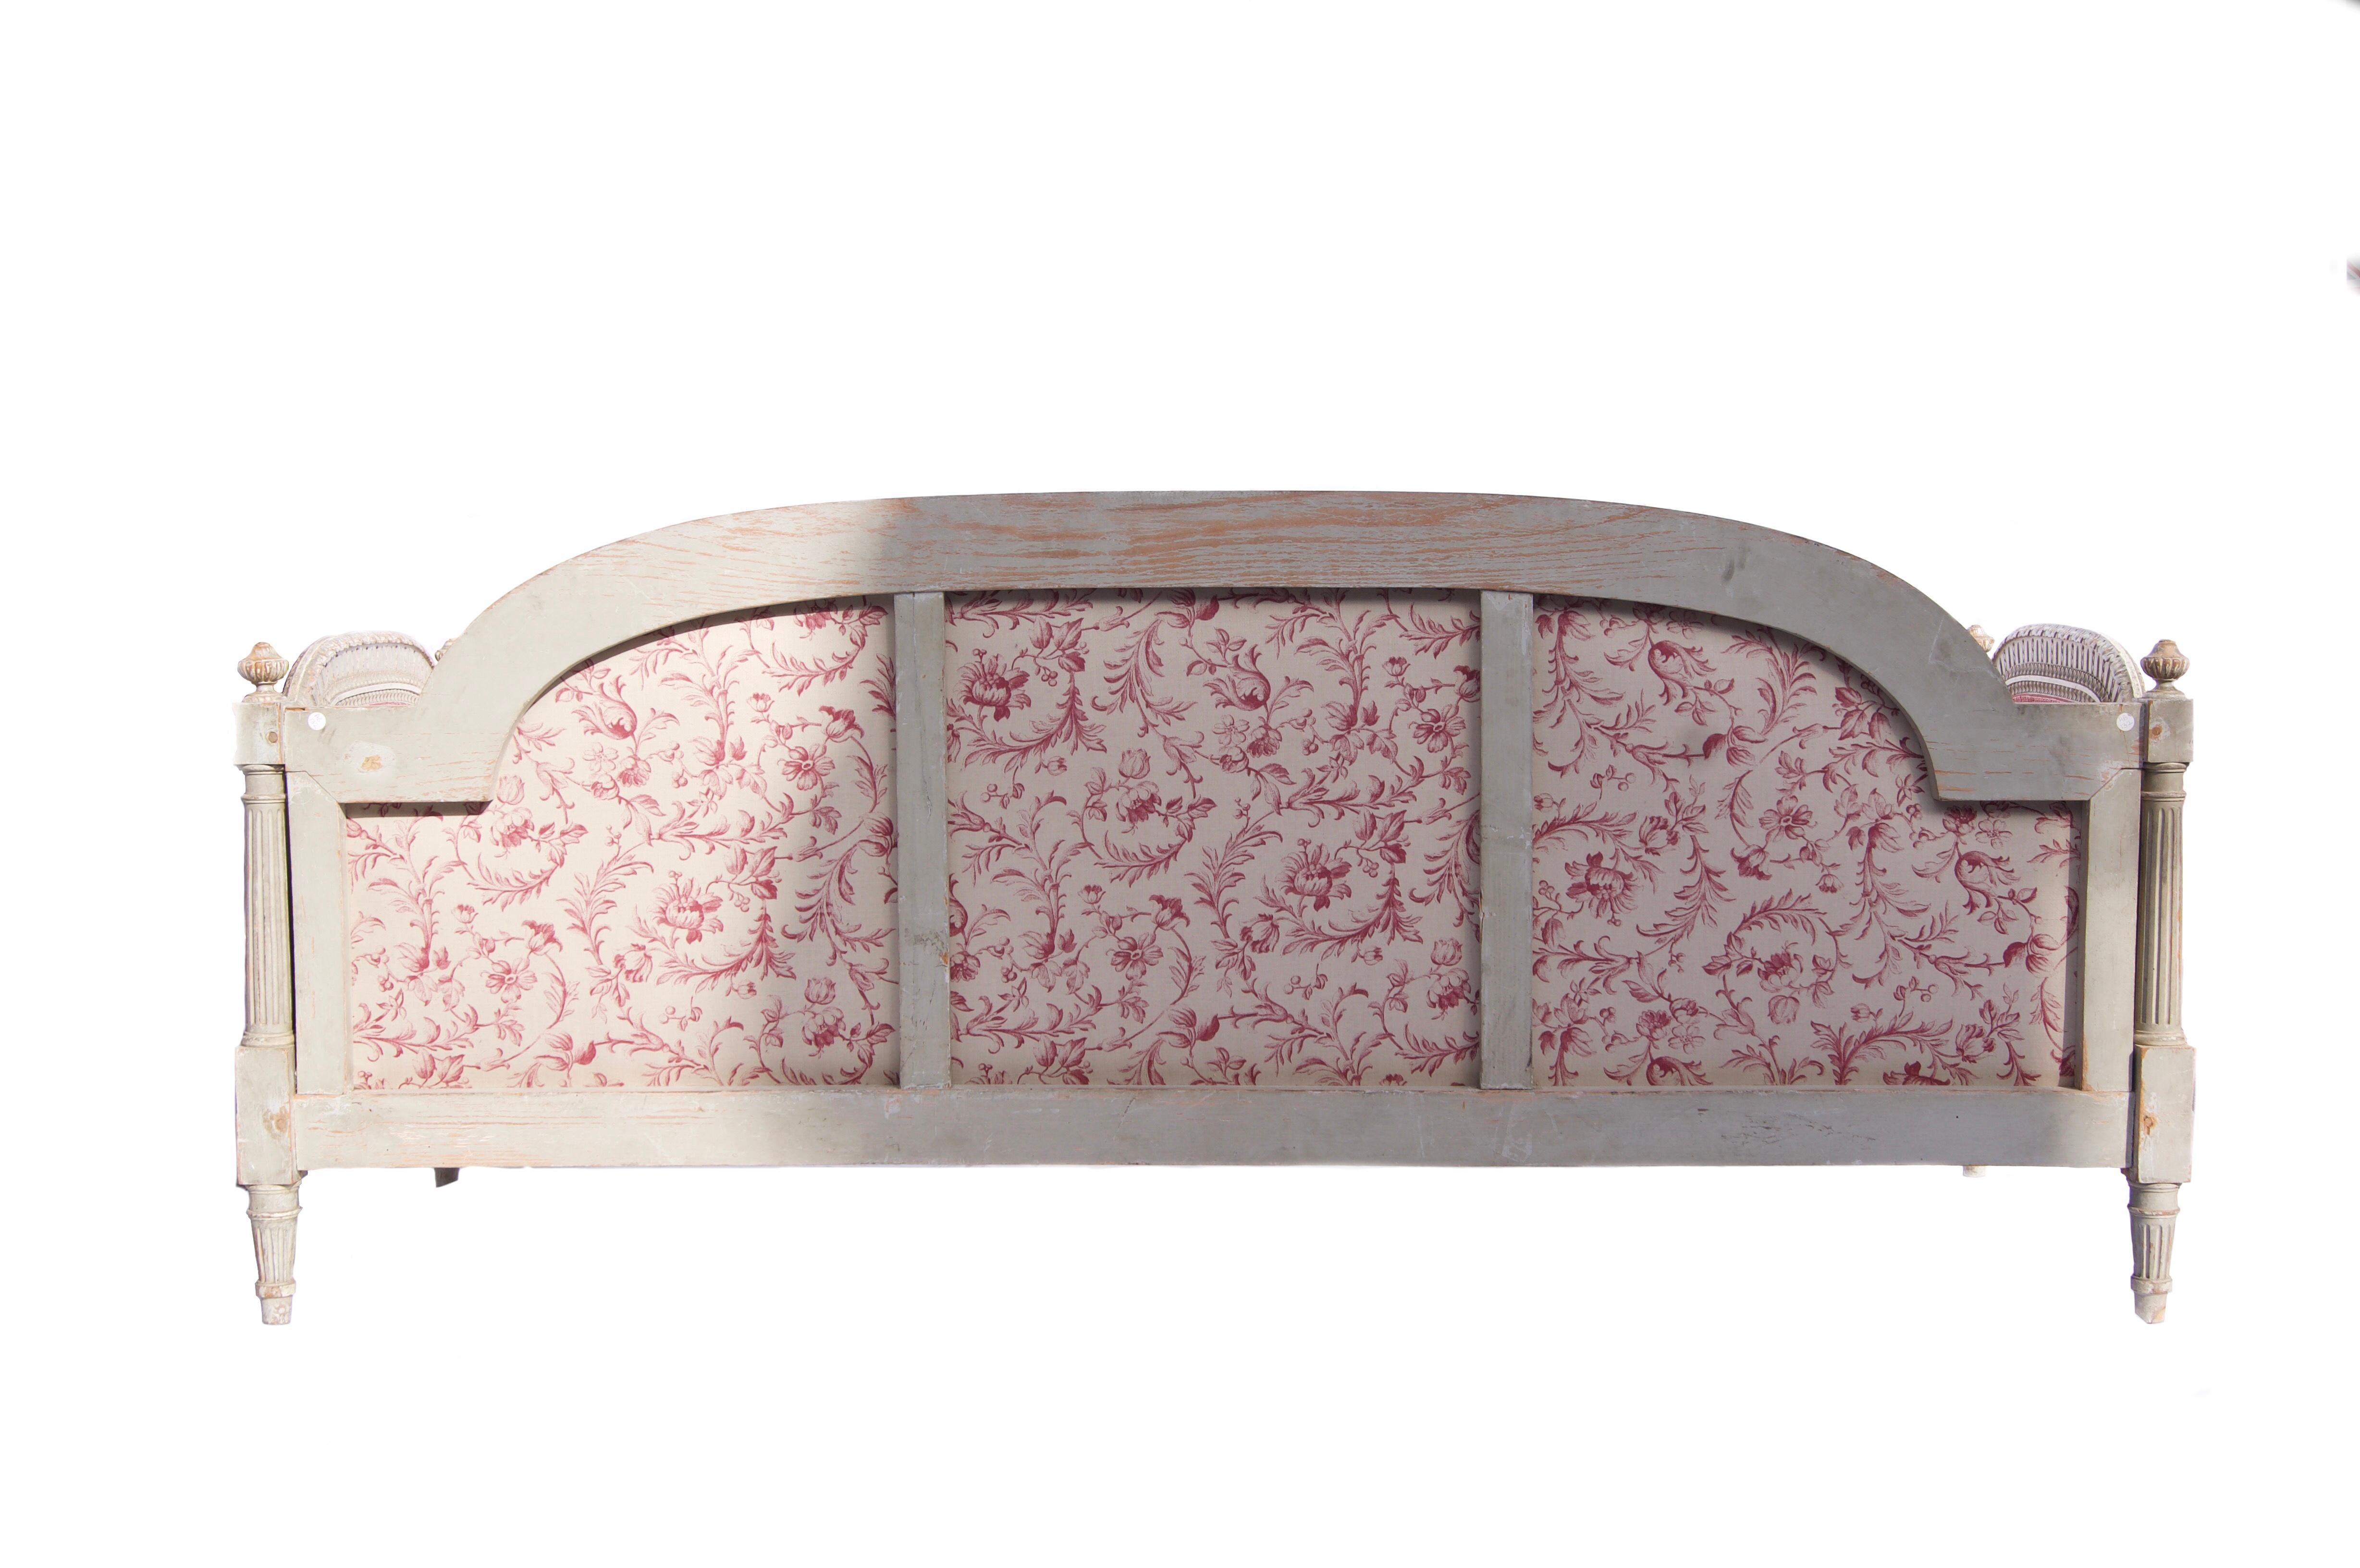 A French Louis XVI style painted and carved wood daybed, late 19th century with shaped back and sides with knop finials, grey paint, upholstered in a raspberry fabric, with a pair of bolster cushions.